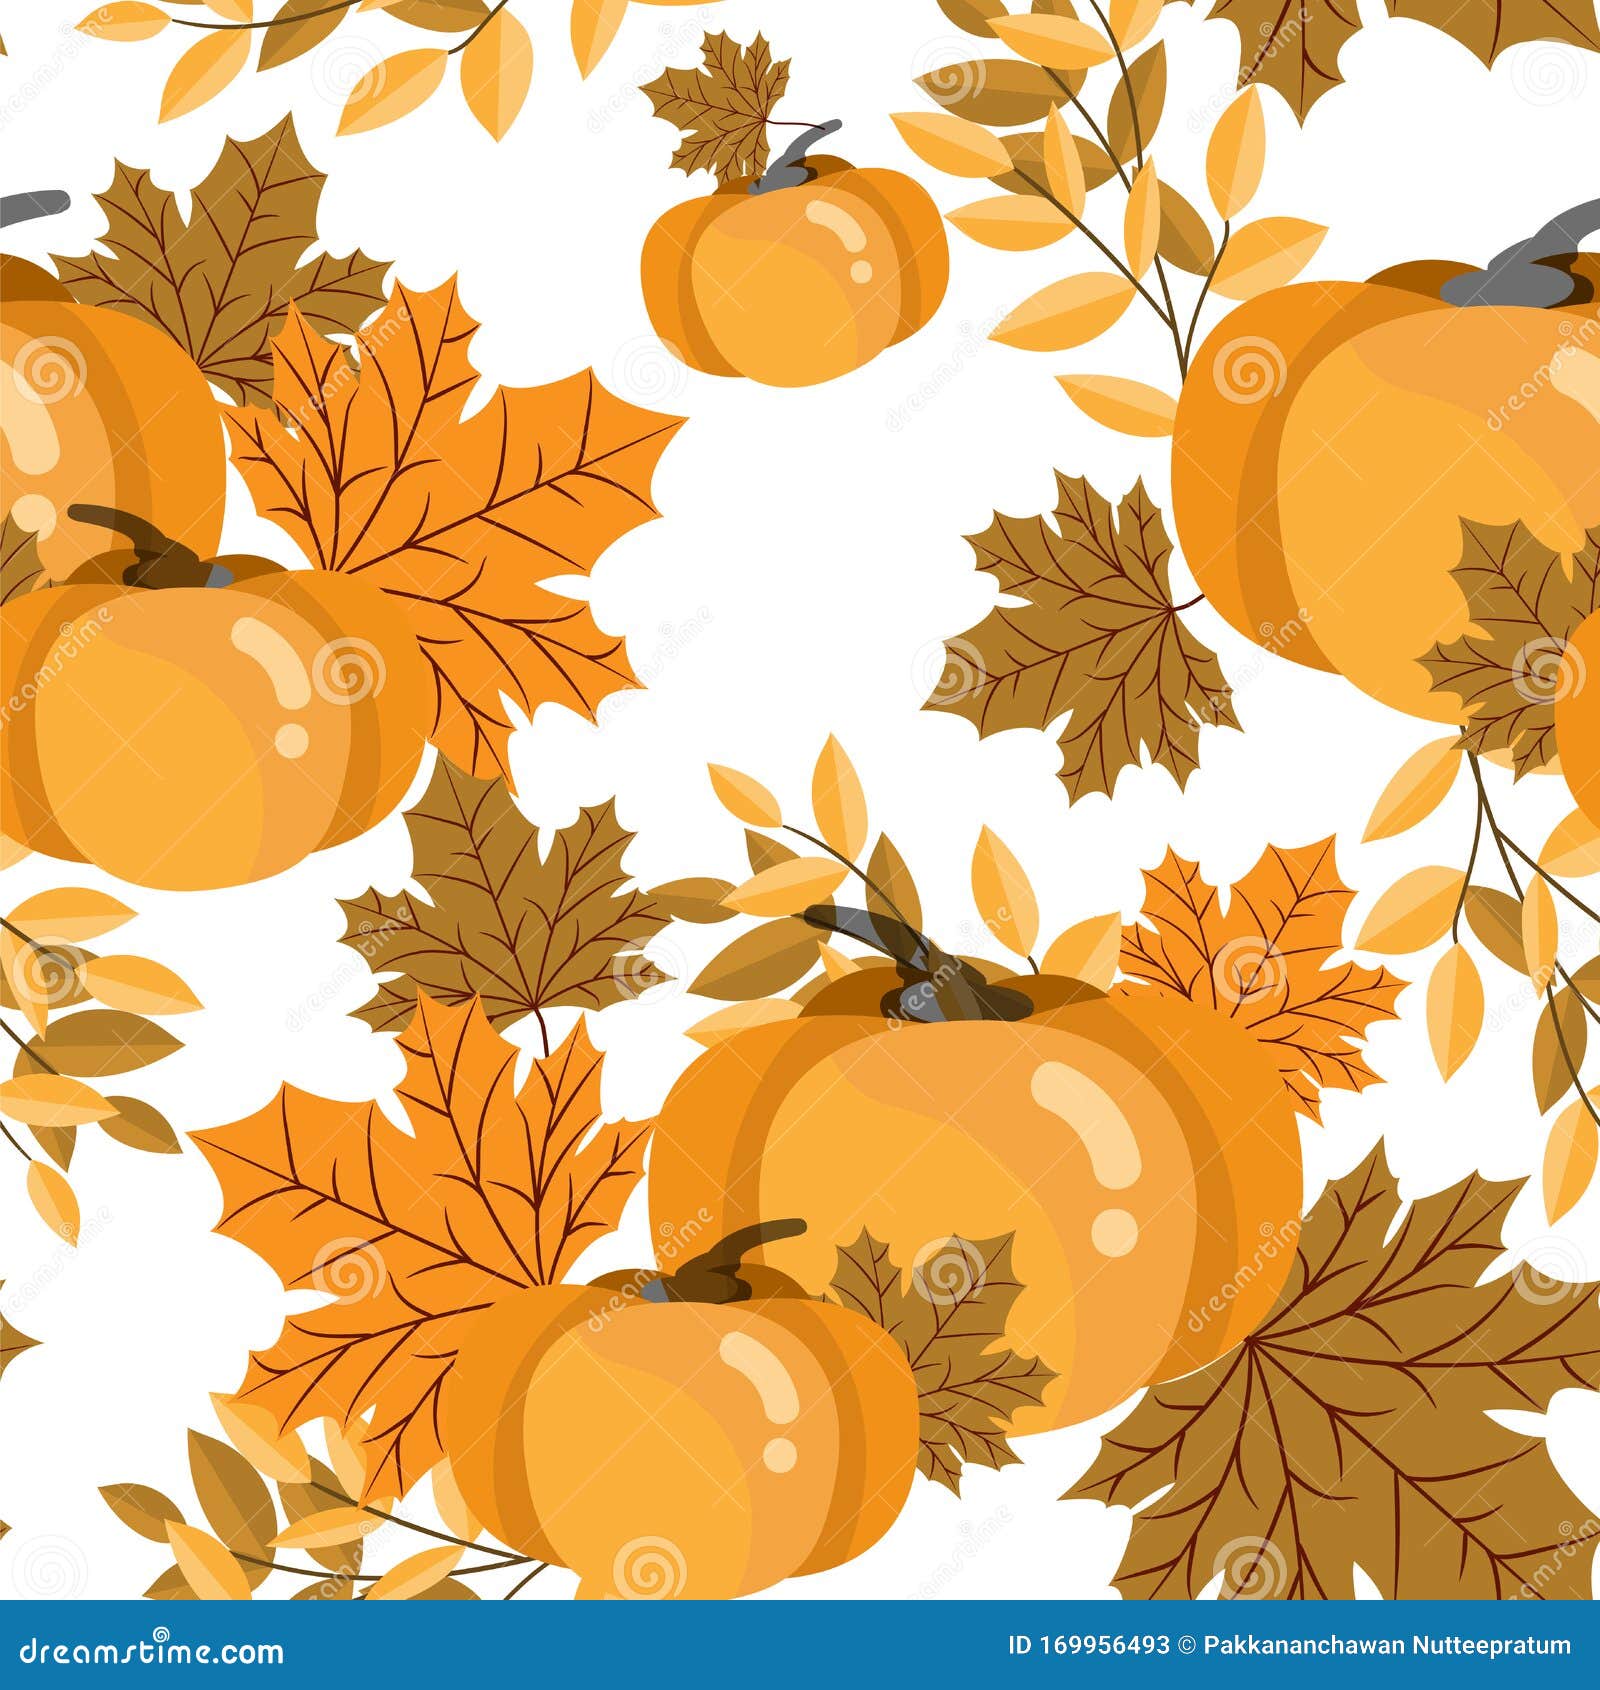 Vector Floral Seamless Pattern with Autumn Leaves, Acorn and Pumpkin ...